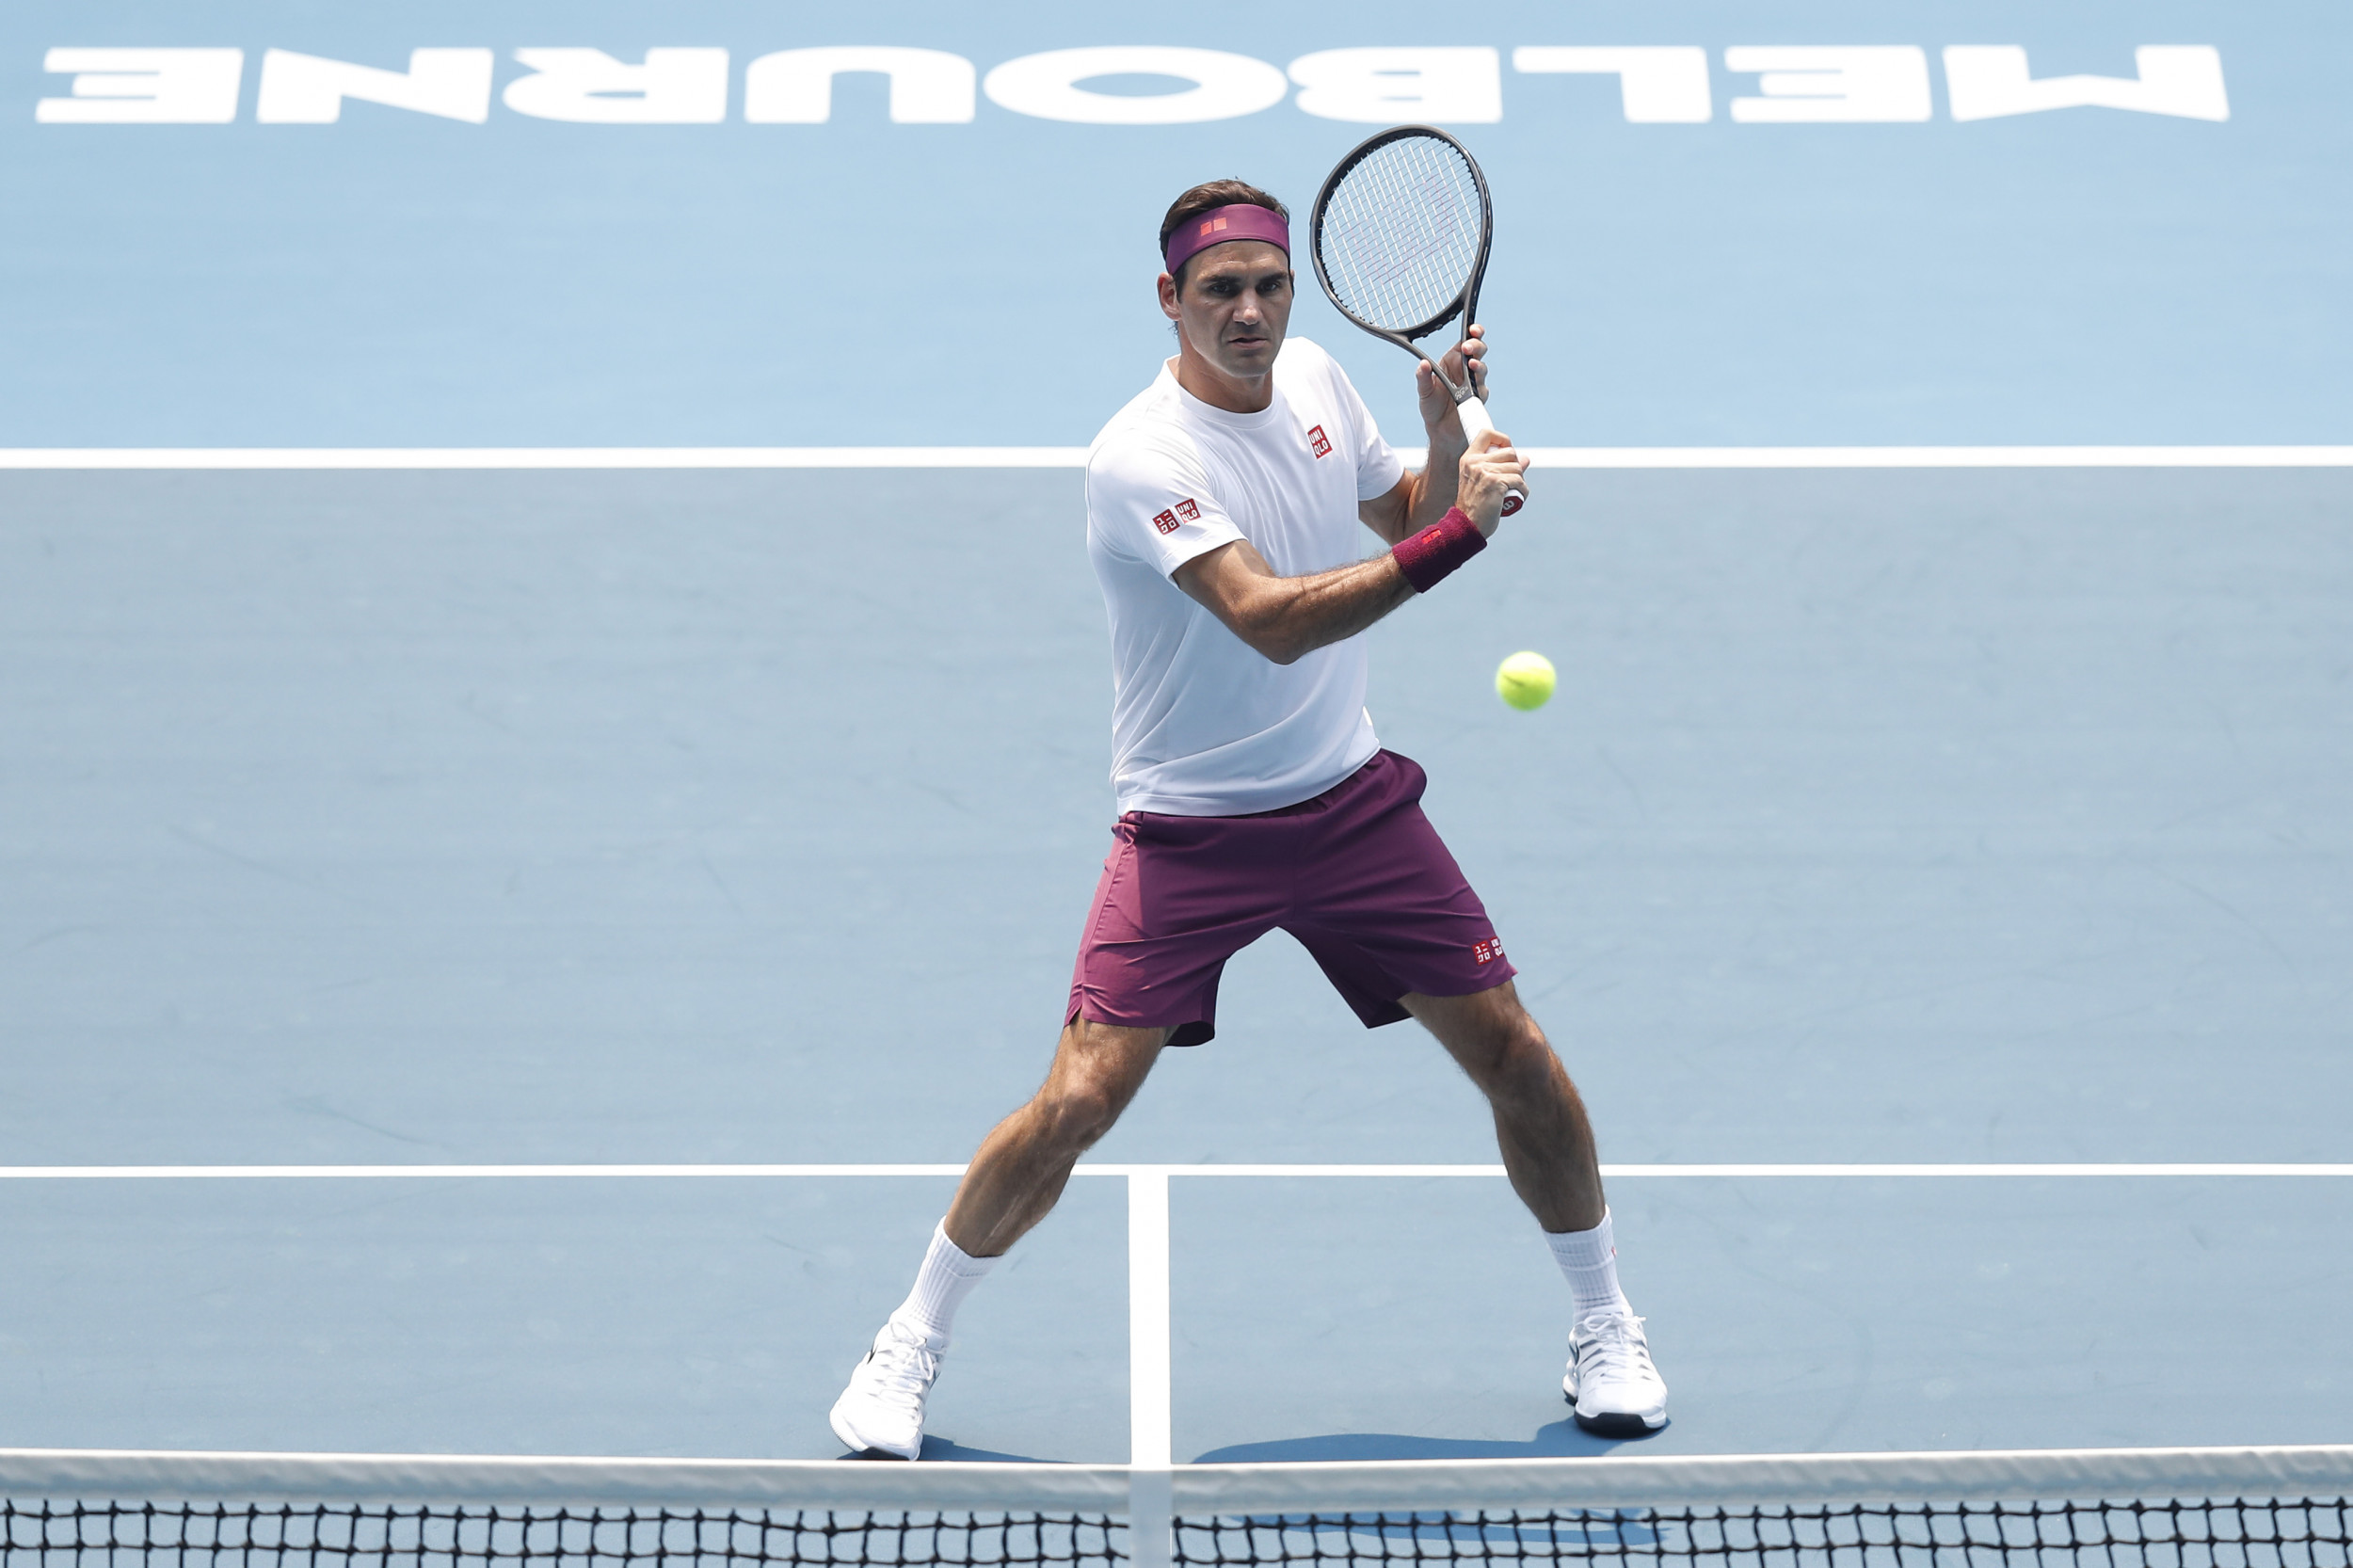 ROGER FEDERER TENNIS Photo Quality Poster D Choose a Size